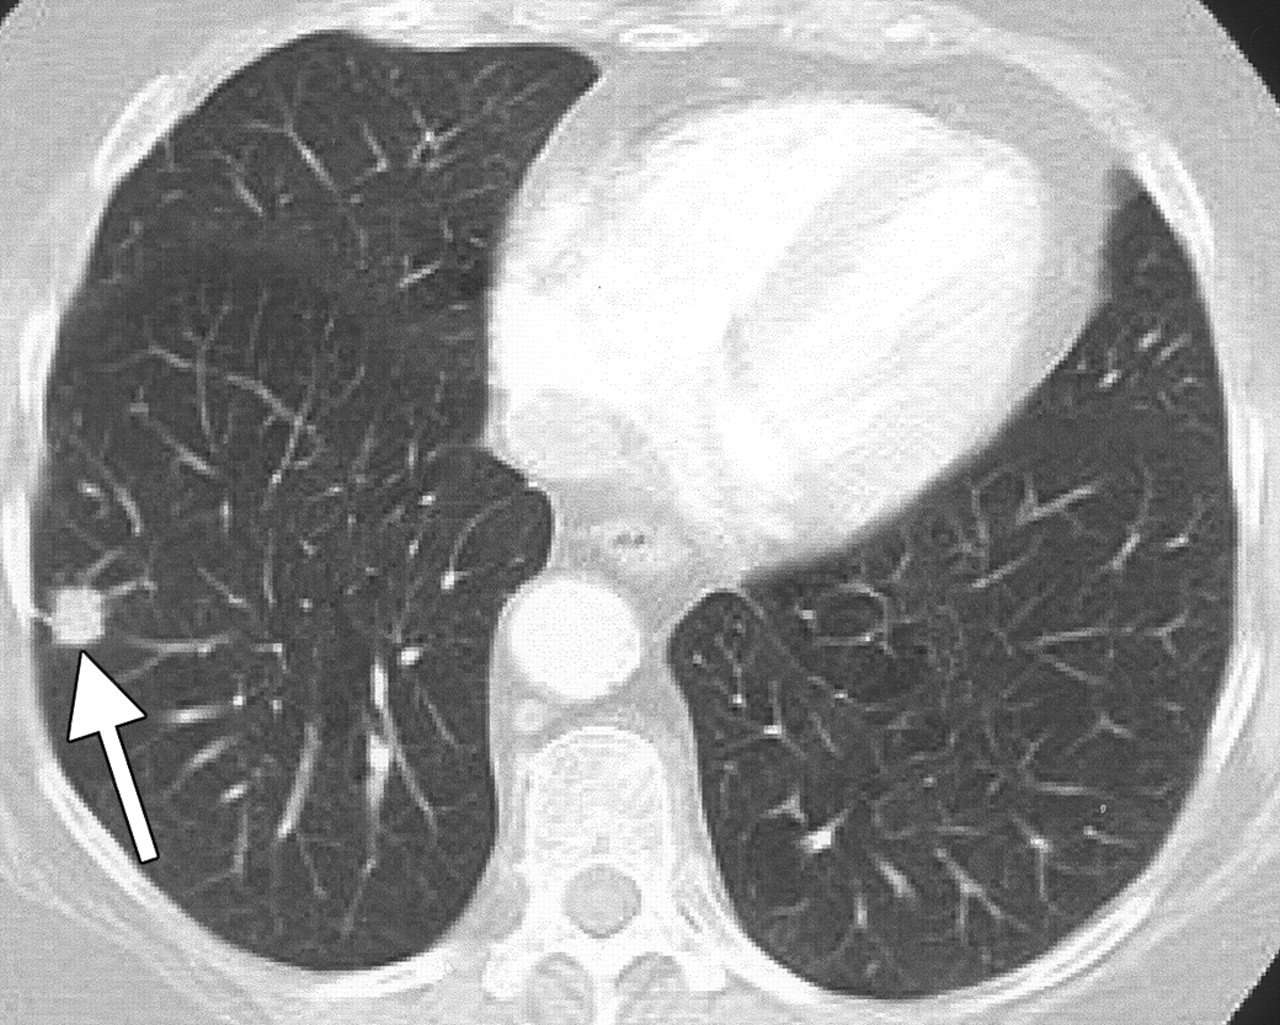 My 2 Cents: Annual Lung CT Scans for Smokers: Good or Bad?